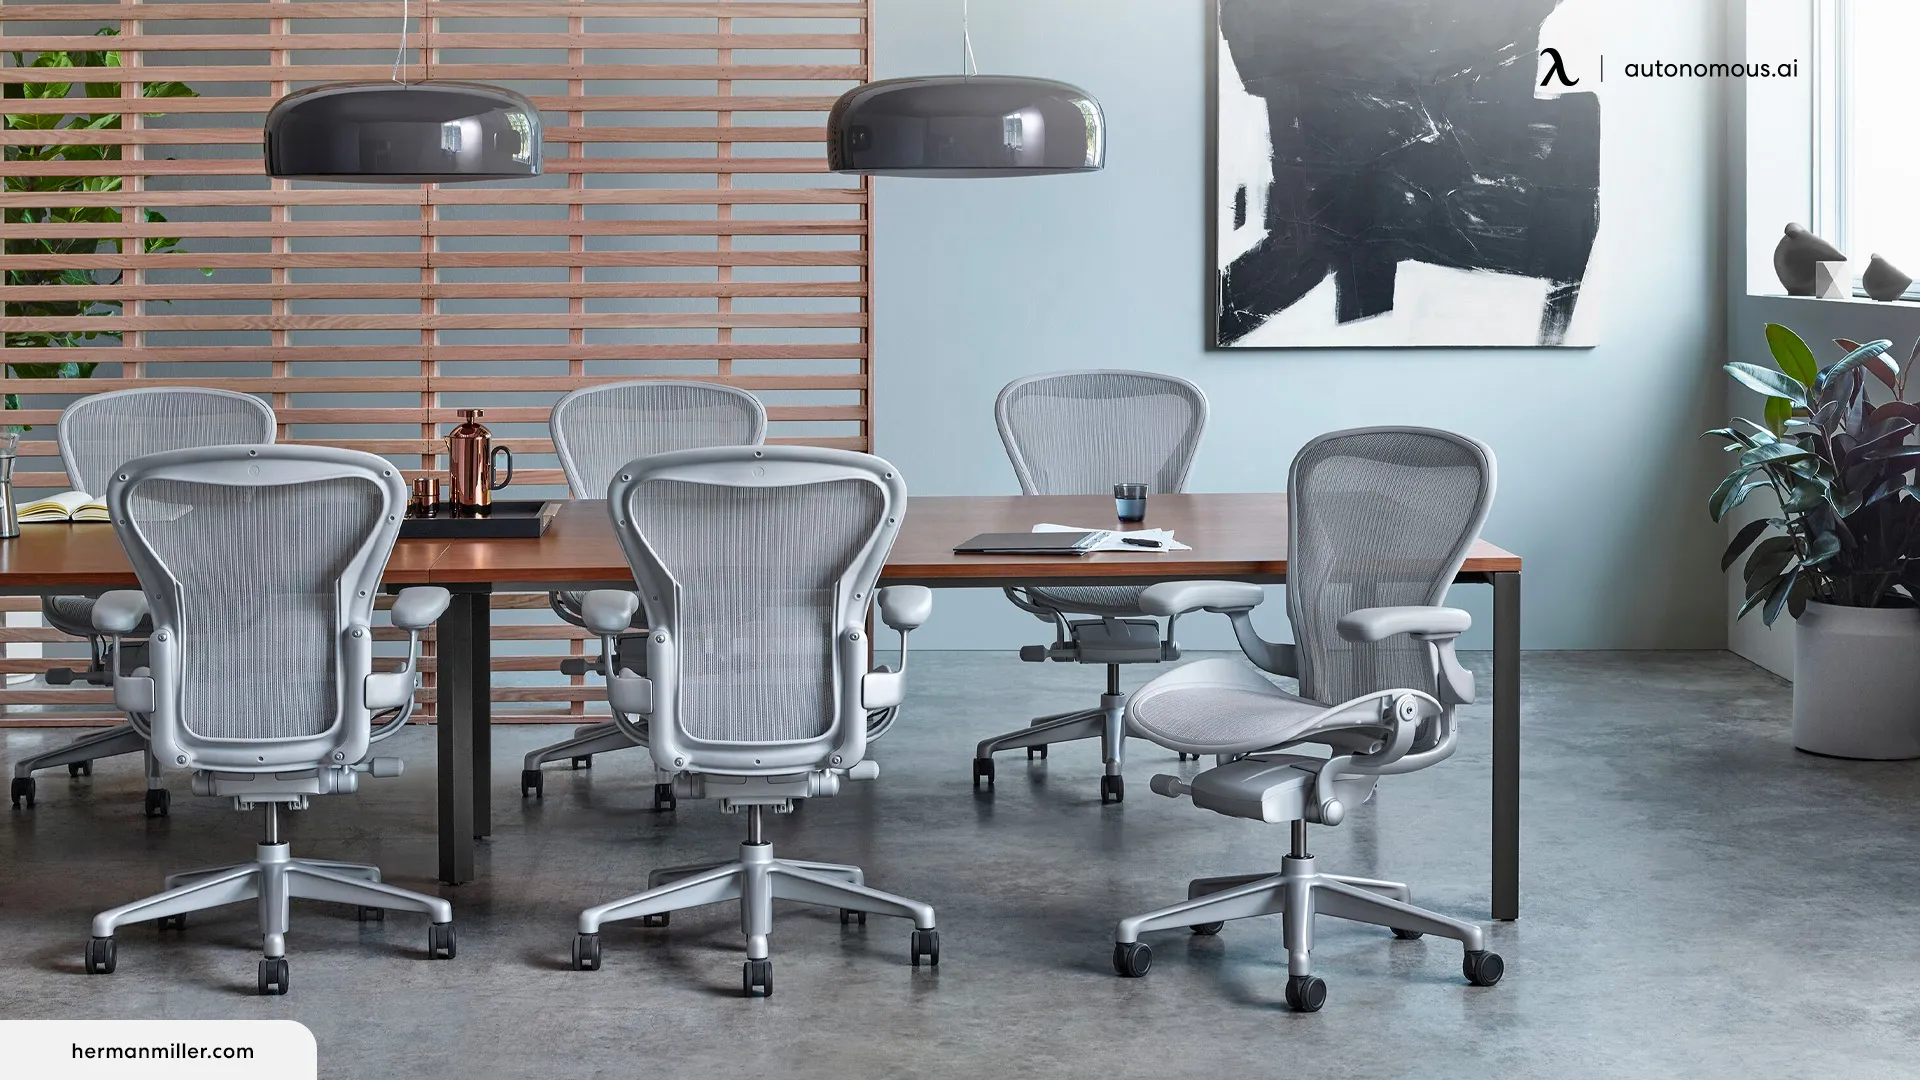 Aeron Chair By Herman Miller REVIEW Expensive But Worth The Cost